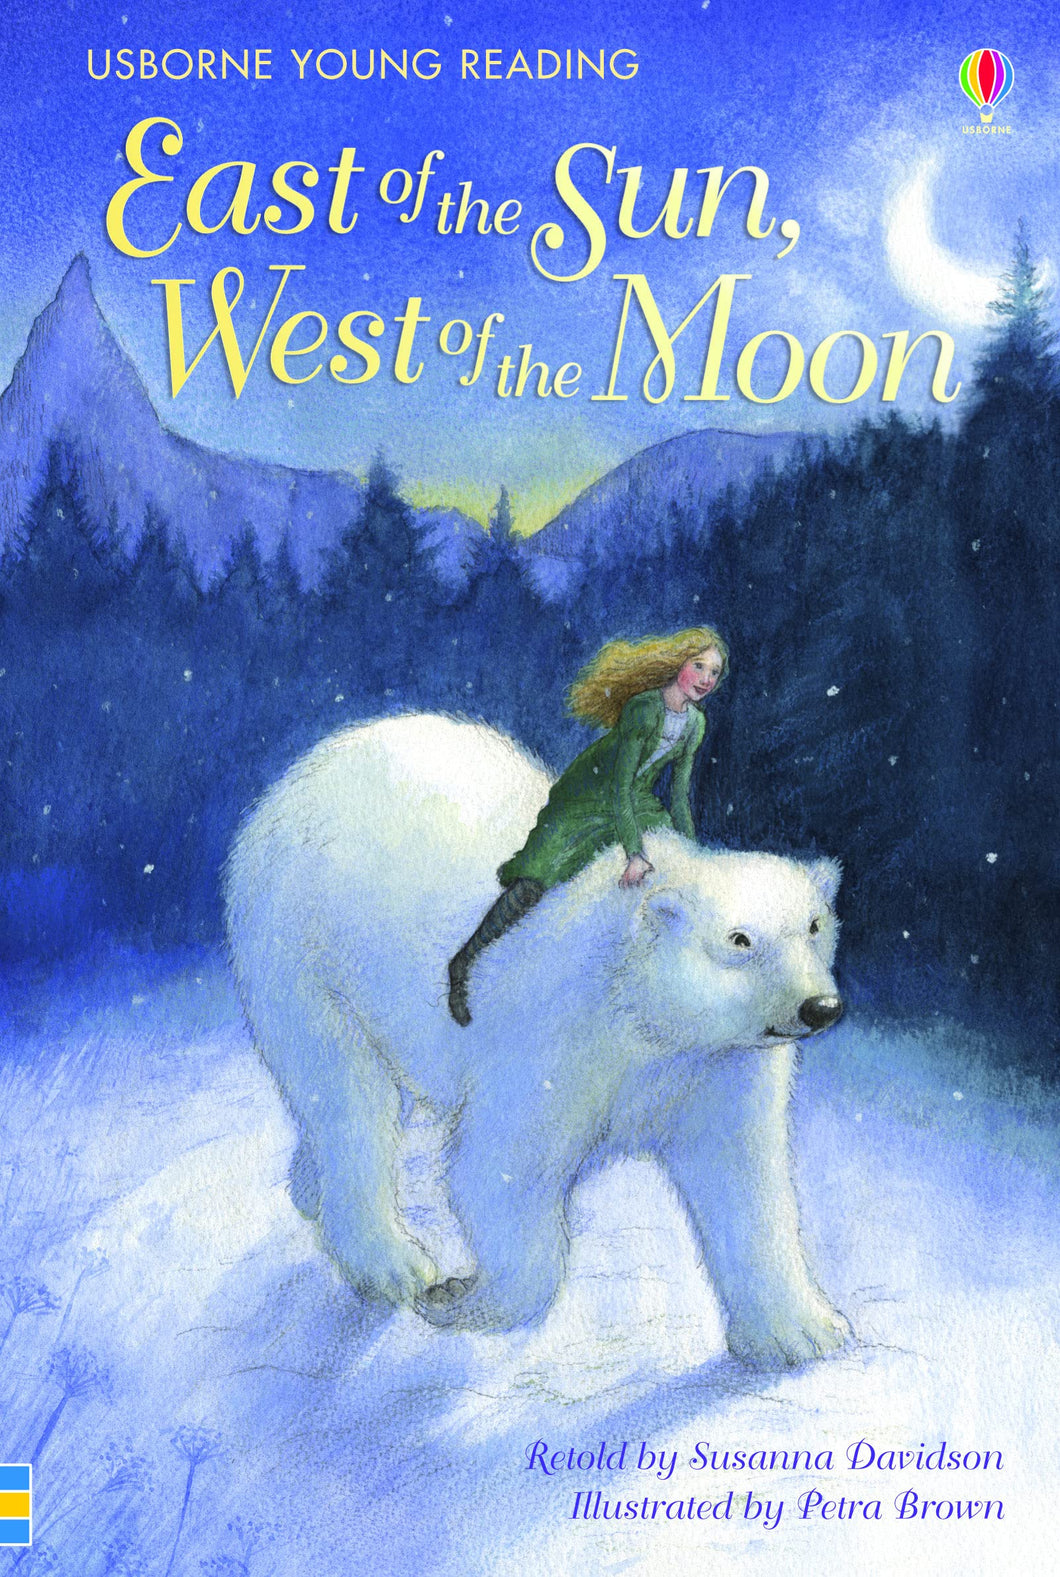 USBORNE YOUNG READING SERIES 2 EAST OF THE SUN WEST OF THE MOON